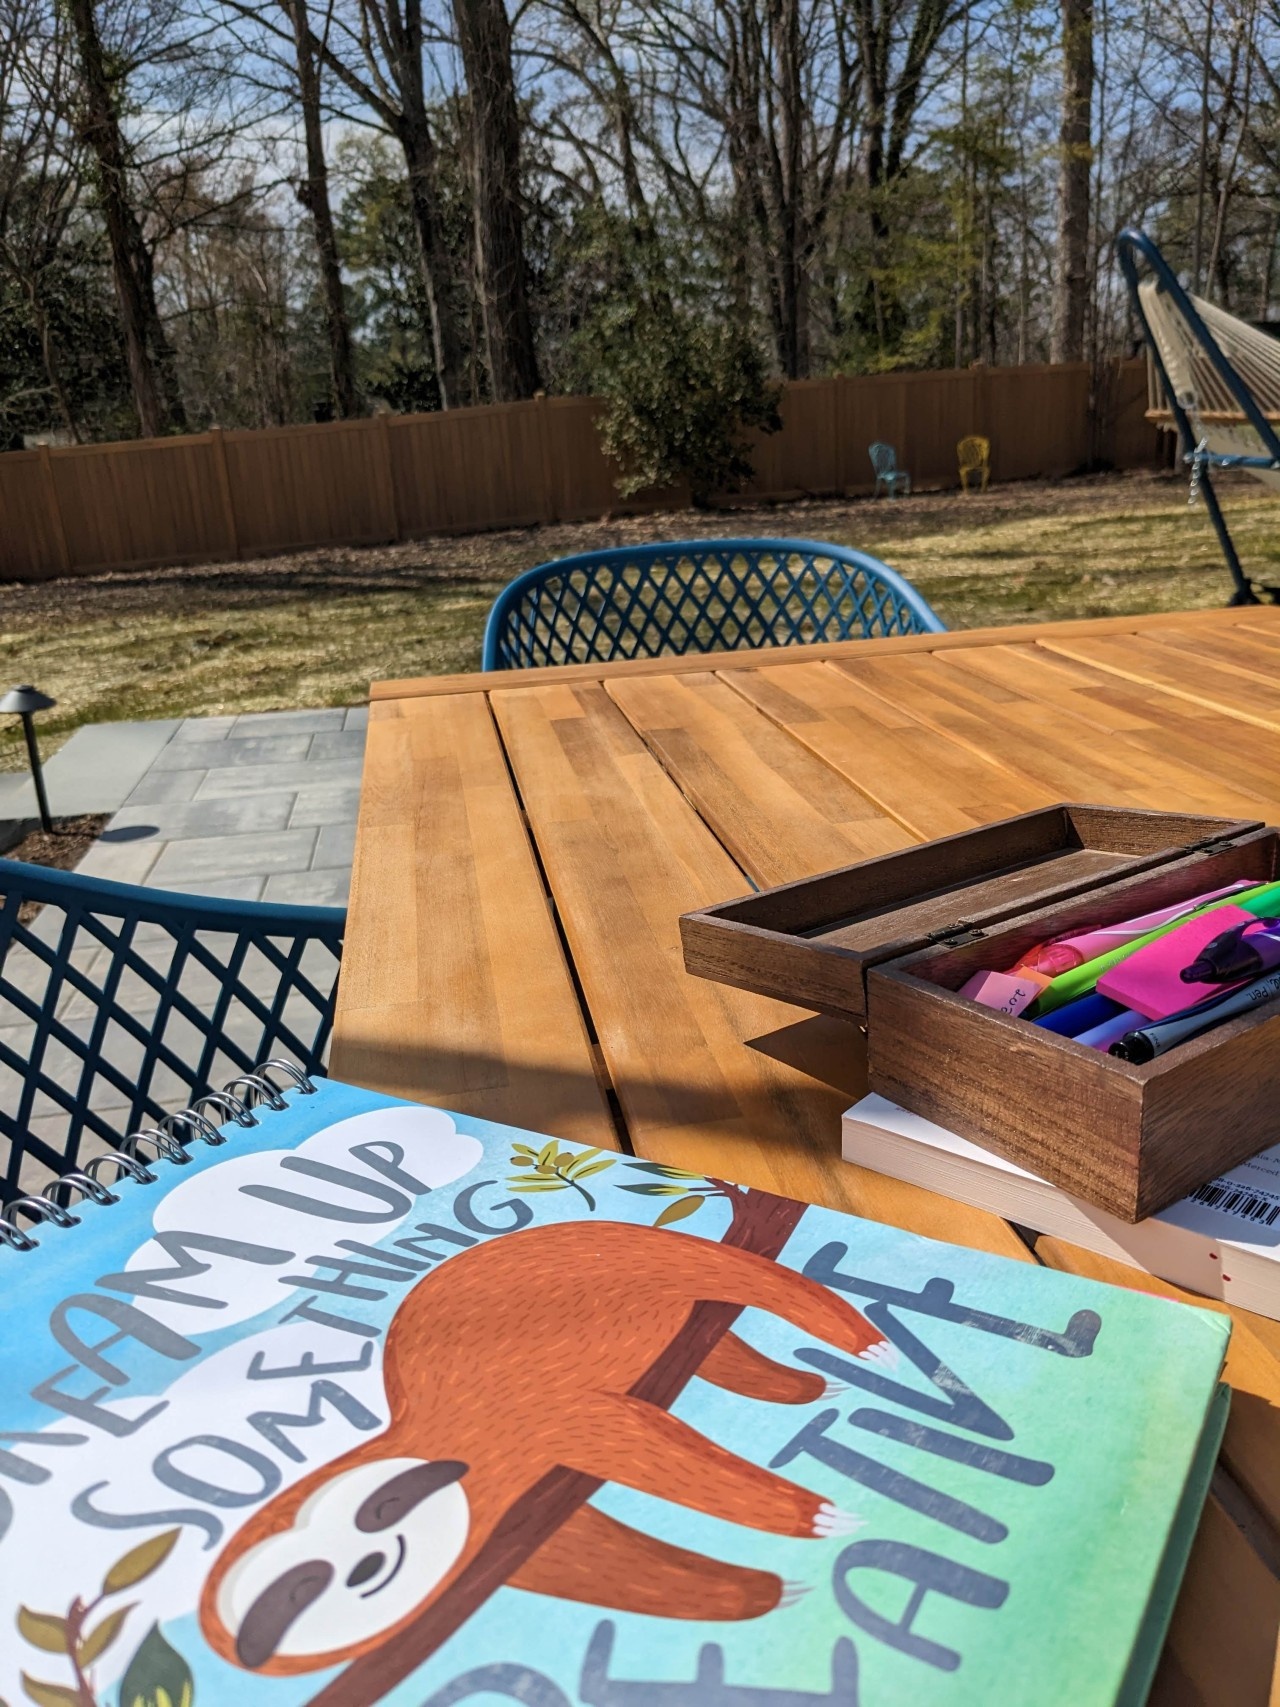 journal and pens on wood table; yard and fence in background